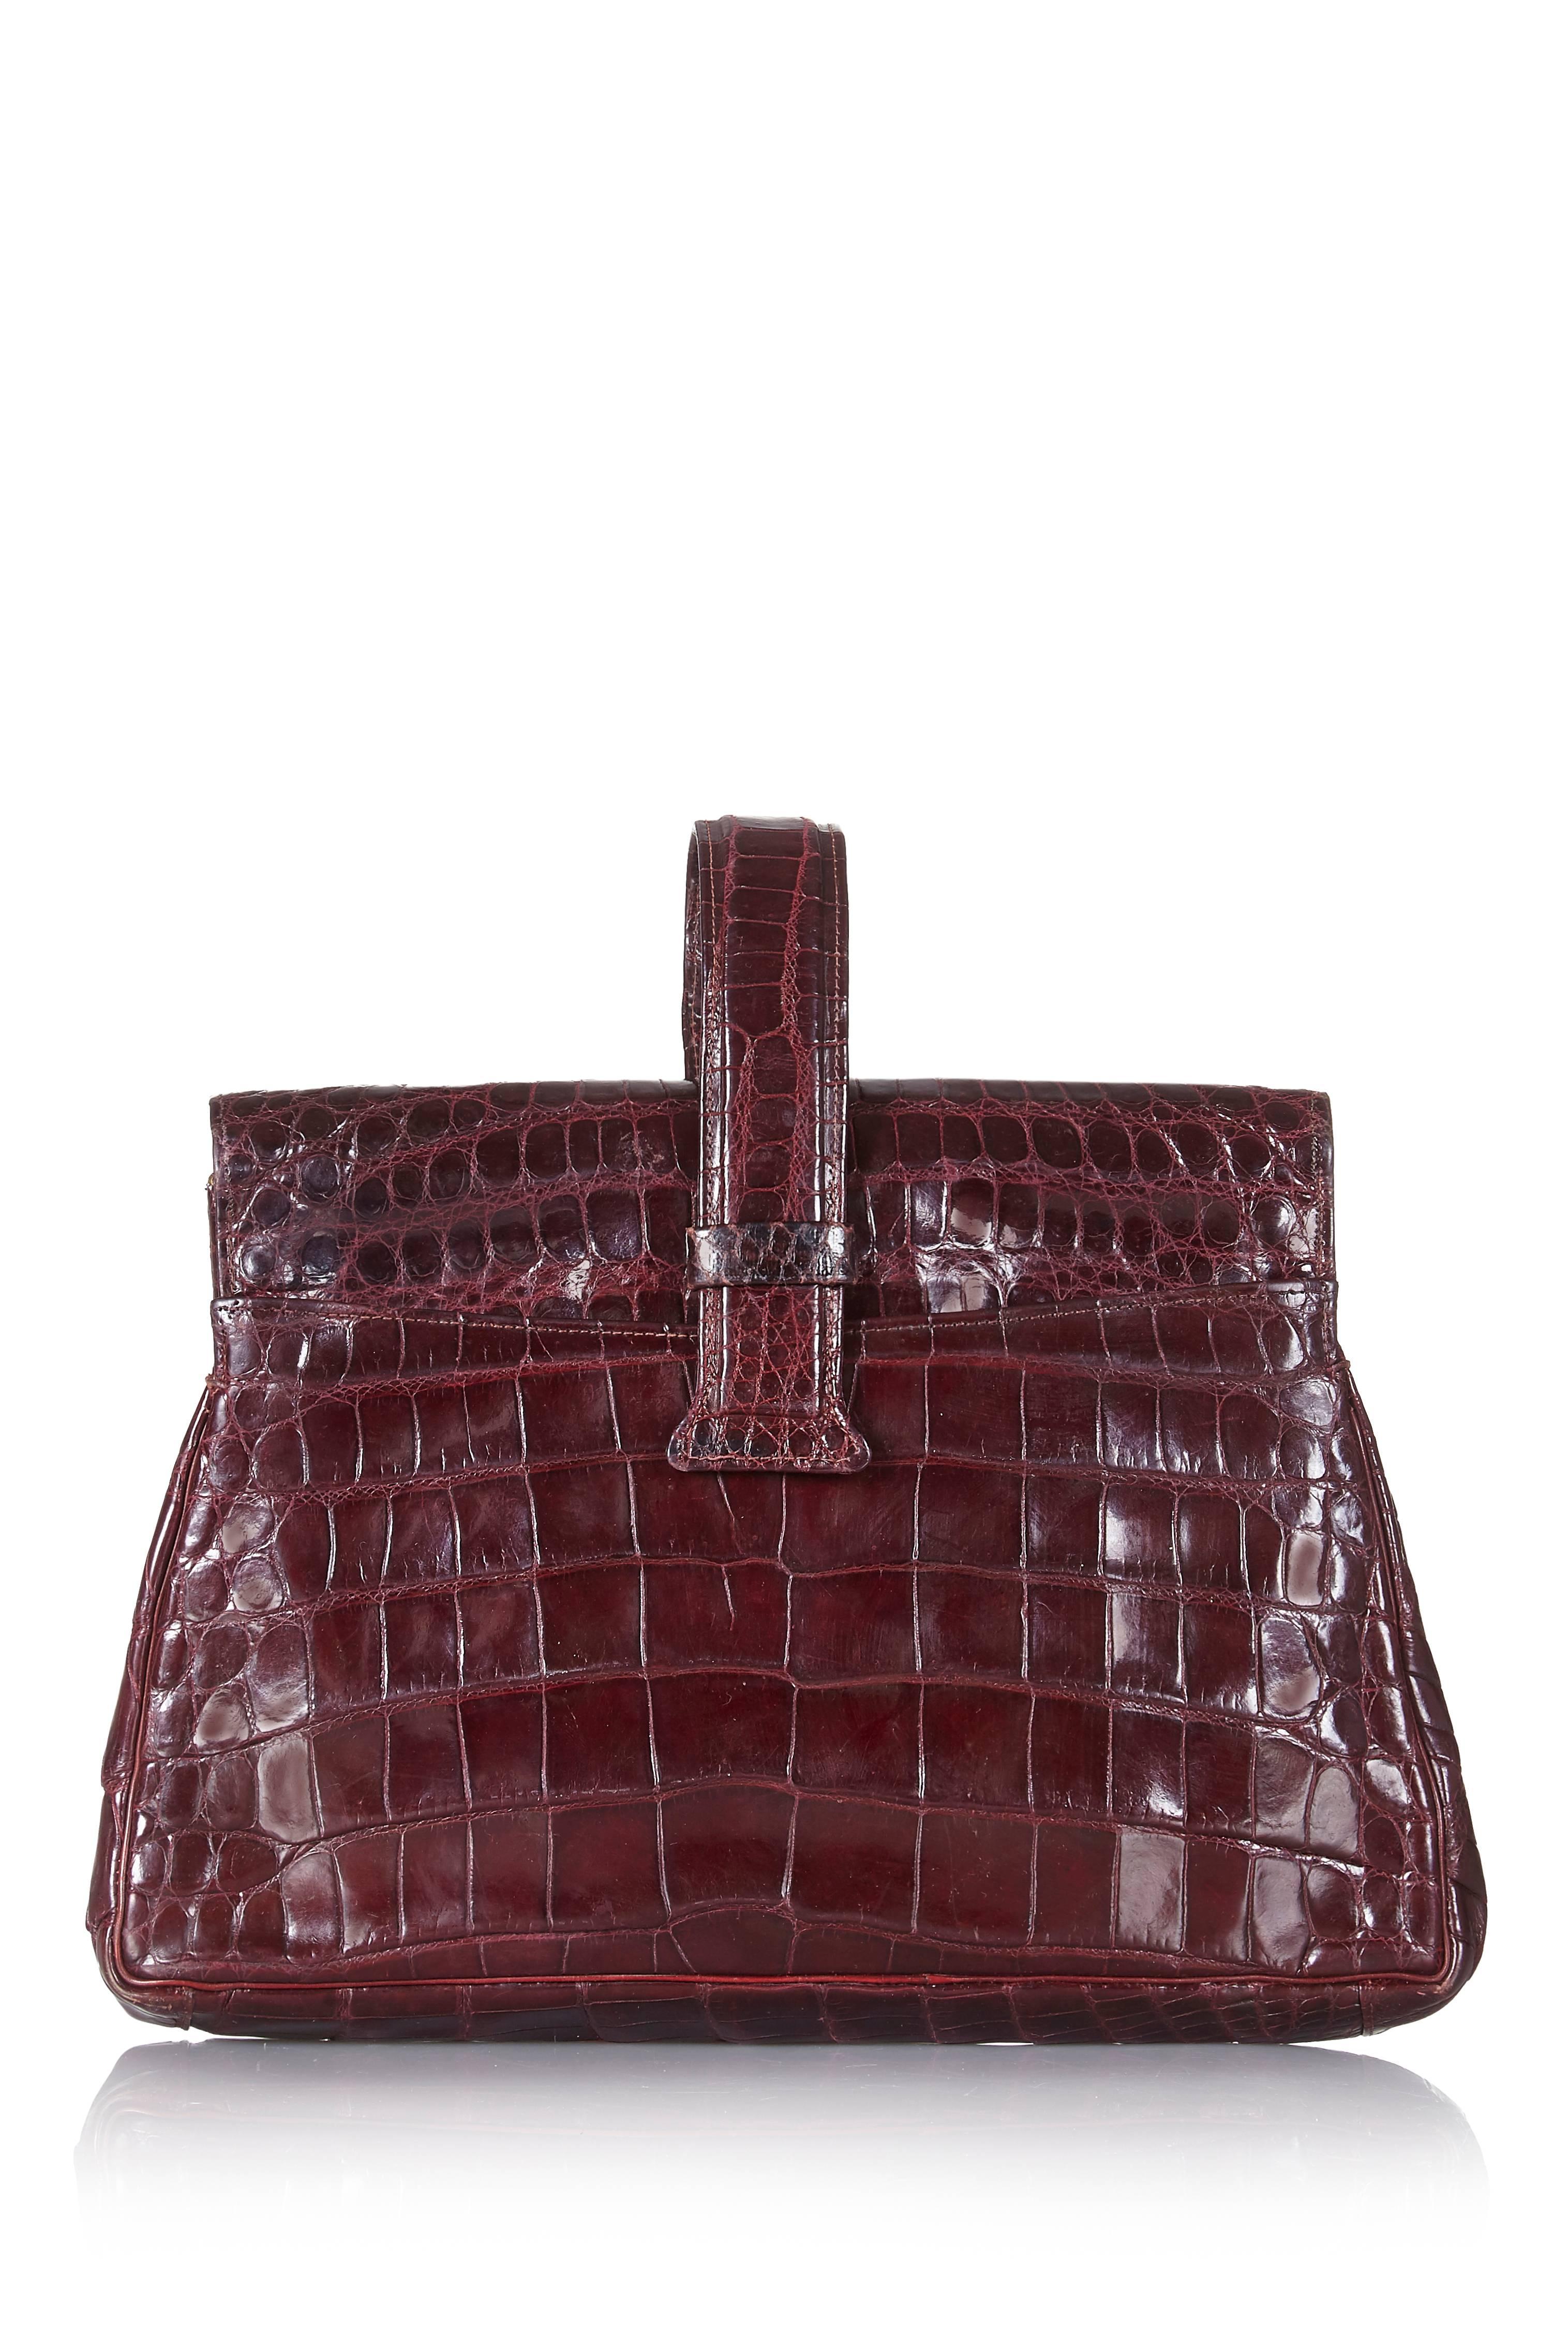 This charming 1940s and large for the era, crocodile skin clutch bag in deep burgundy is in superb vintage condition.  The skin is soft and supple having developed a shiny patina over the years. Beautifully made and in a traditional trapezium shape